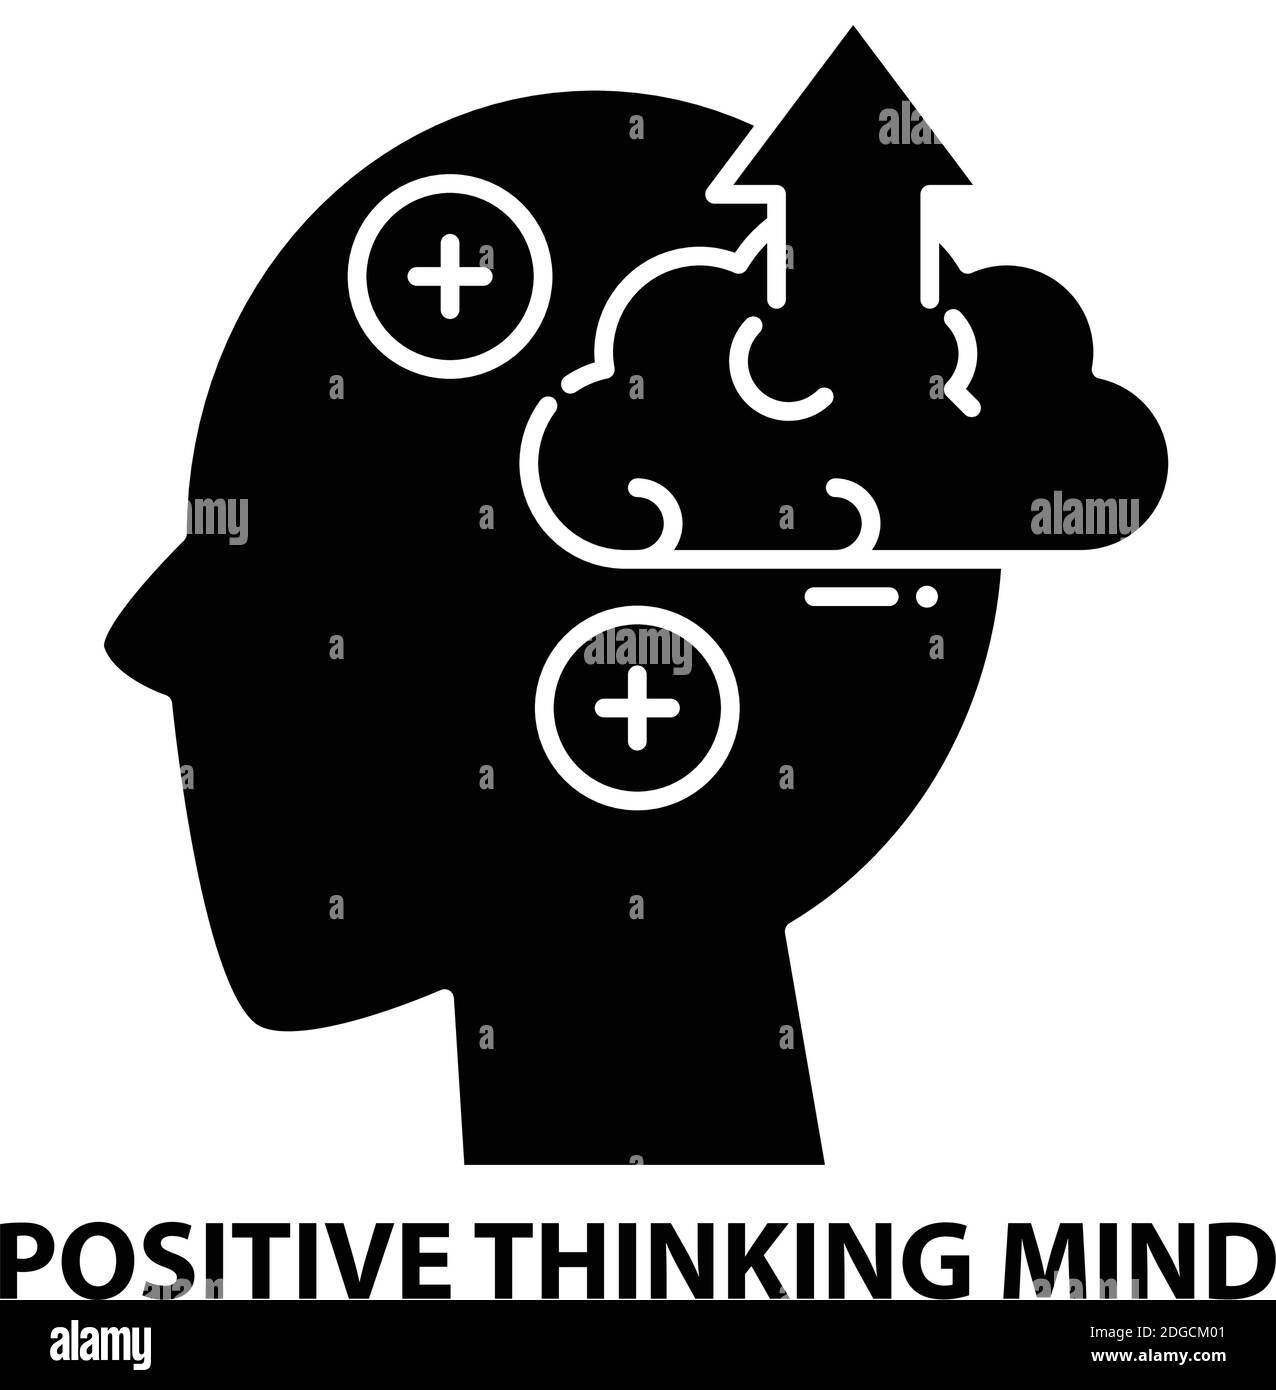 positive thinking mind symbol icon, black vector sign with editable strokes, concept illustration Stock Vector